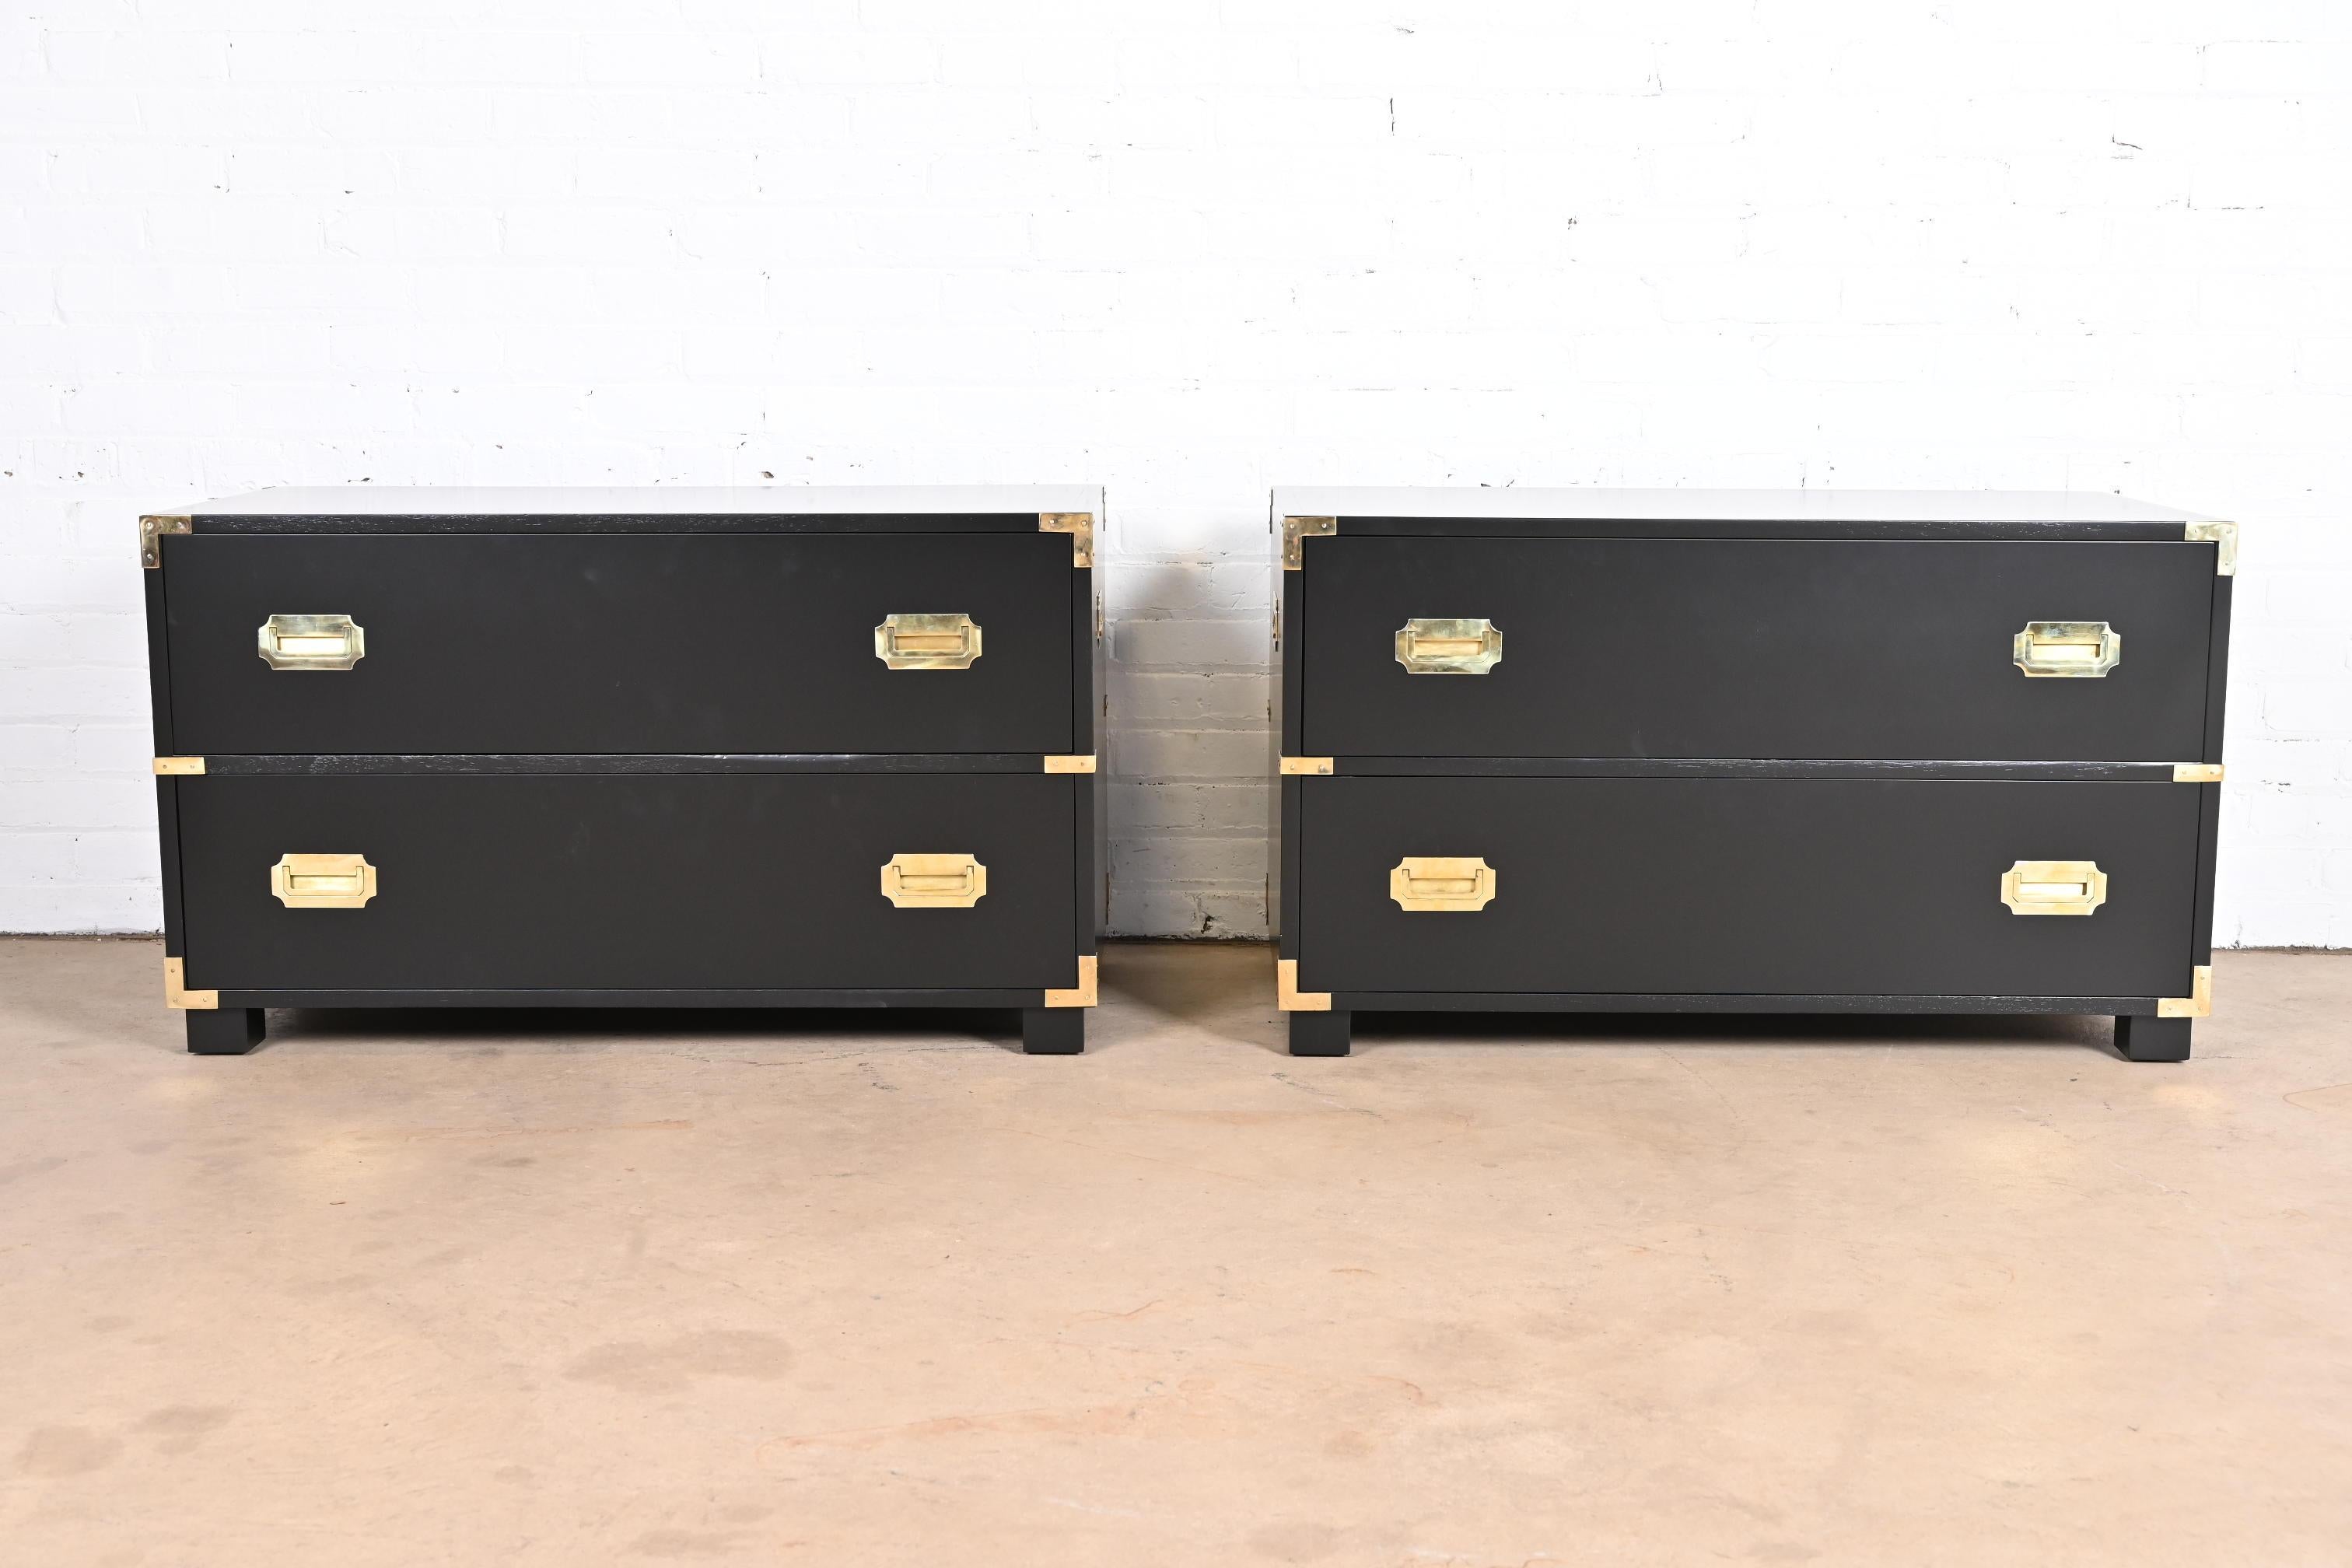 An exceptional pair of mid-century modern Hollywood Regency Campaign style two-drawer lowboy dressers or bedside chests of drawers

by Michael Taylor for Baker Furniture, 